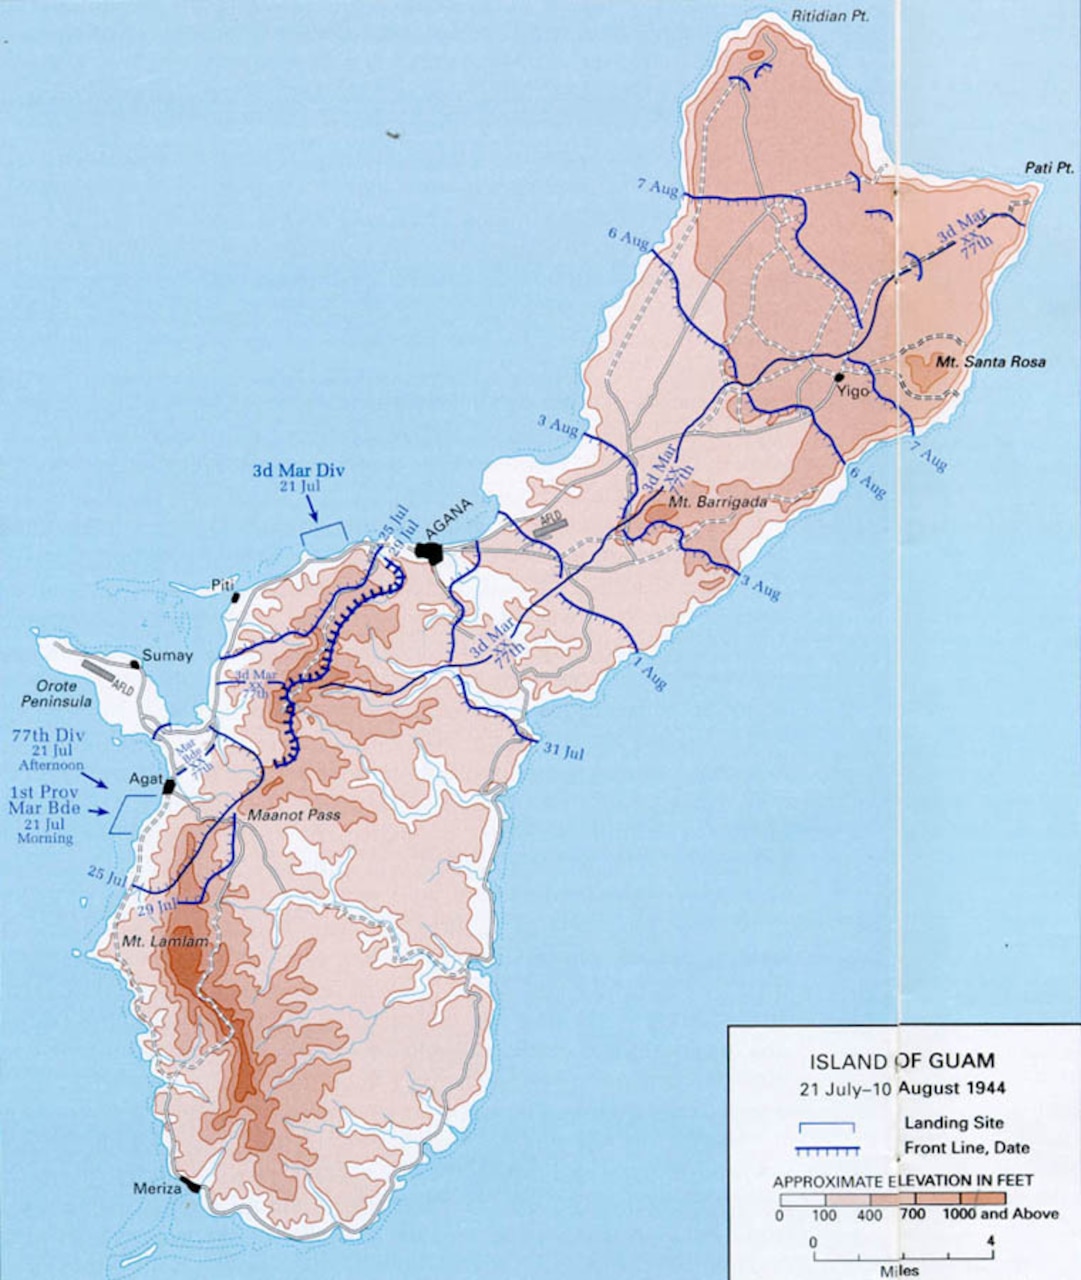 A map of Guam shows routes of troop movements.